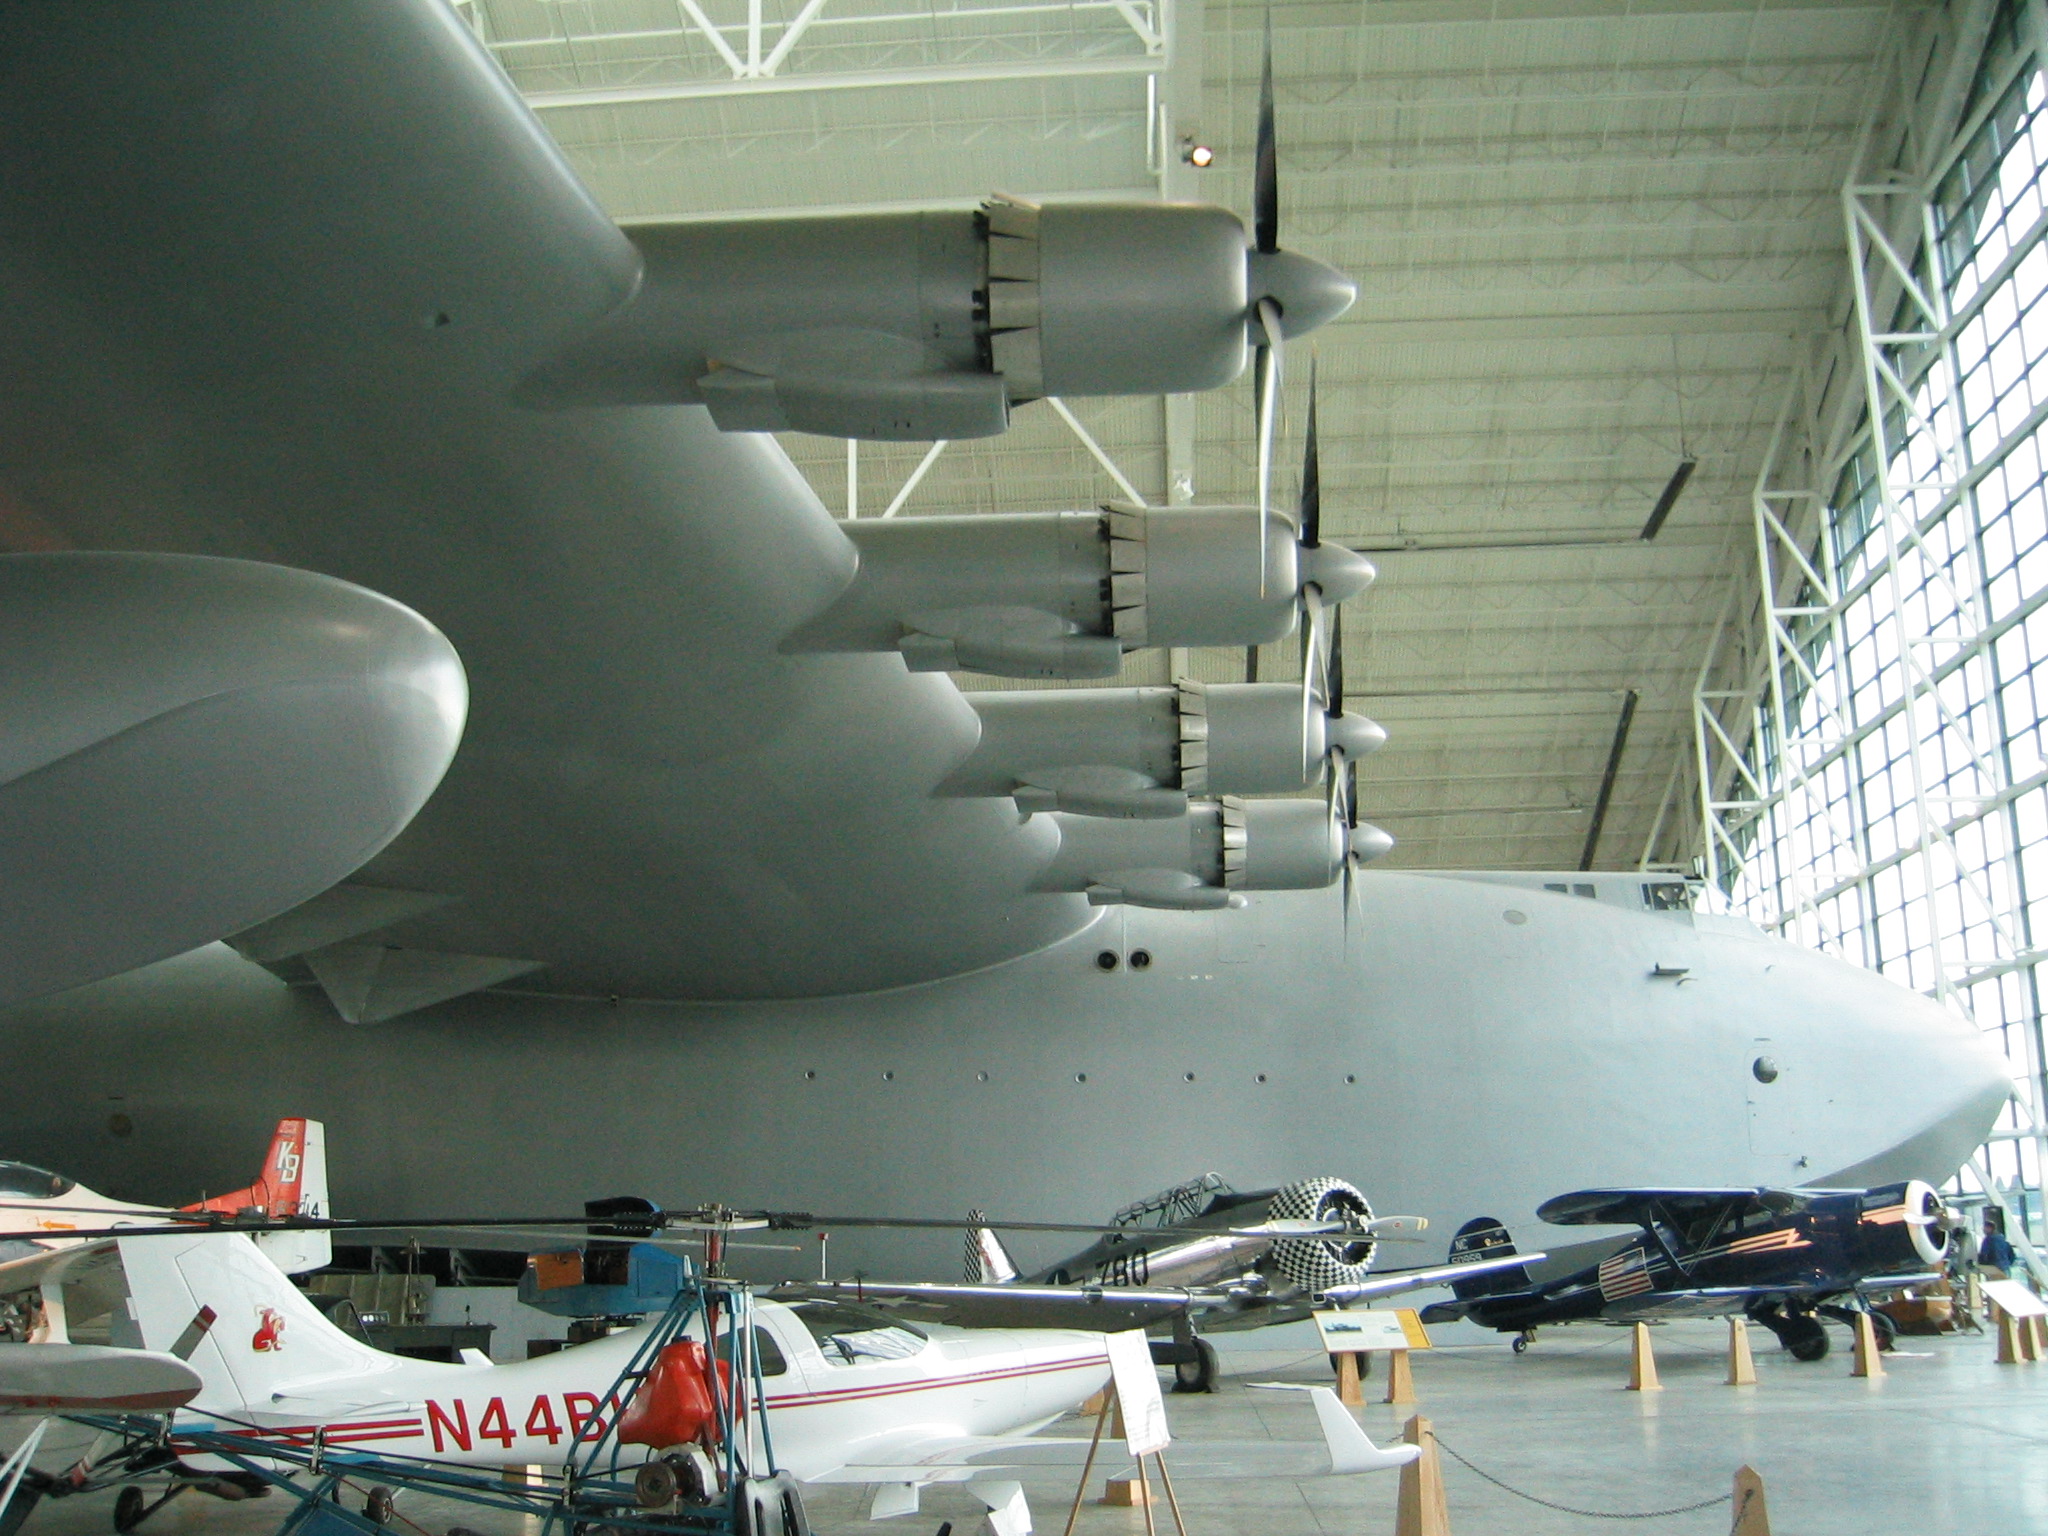 Spruce_Goose_righthand_wing_with_enjins.jpg